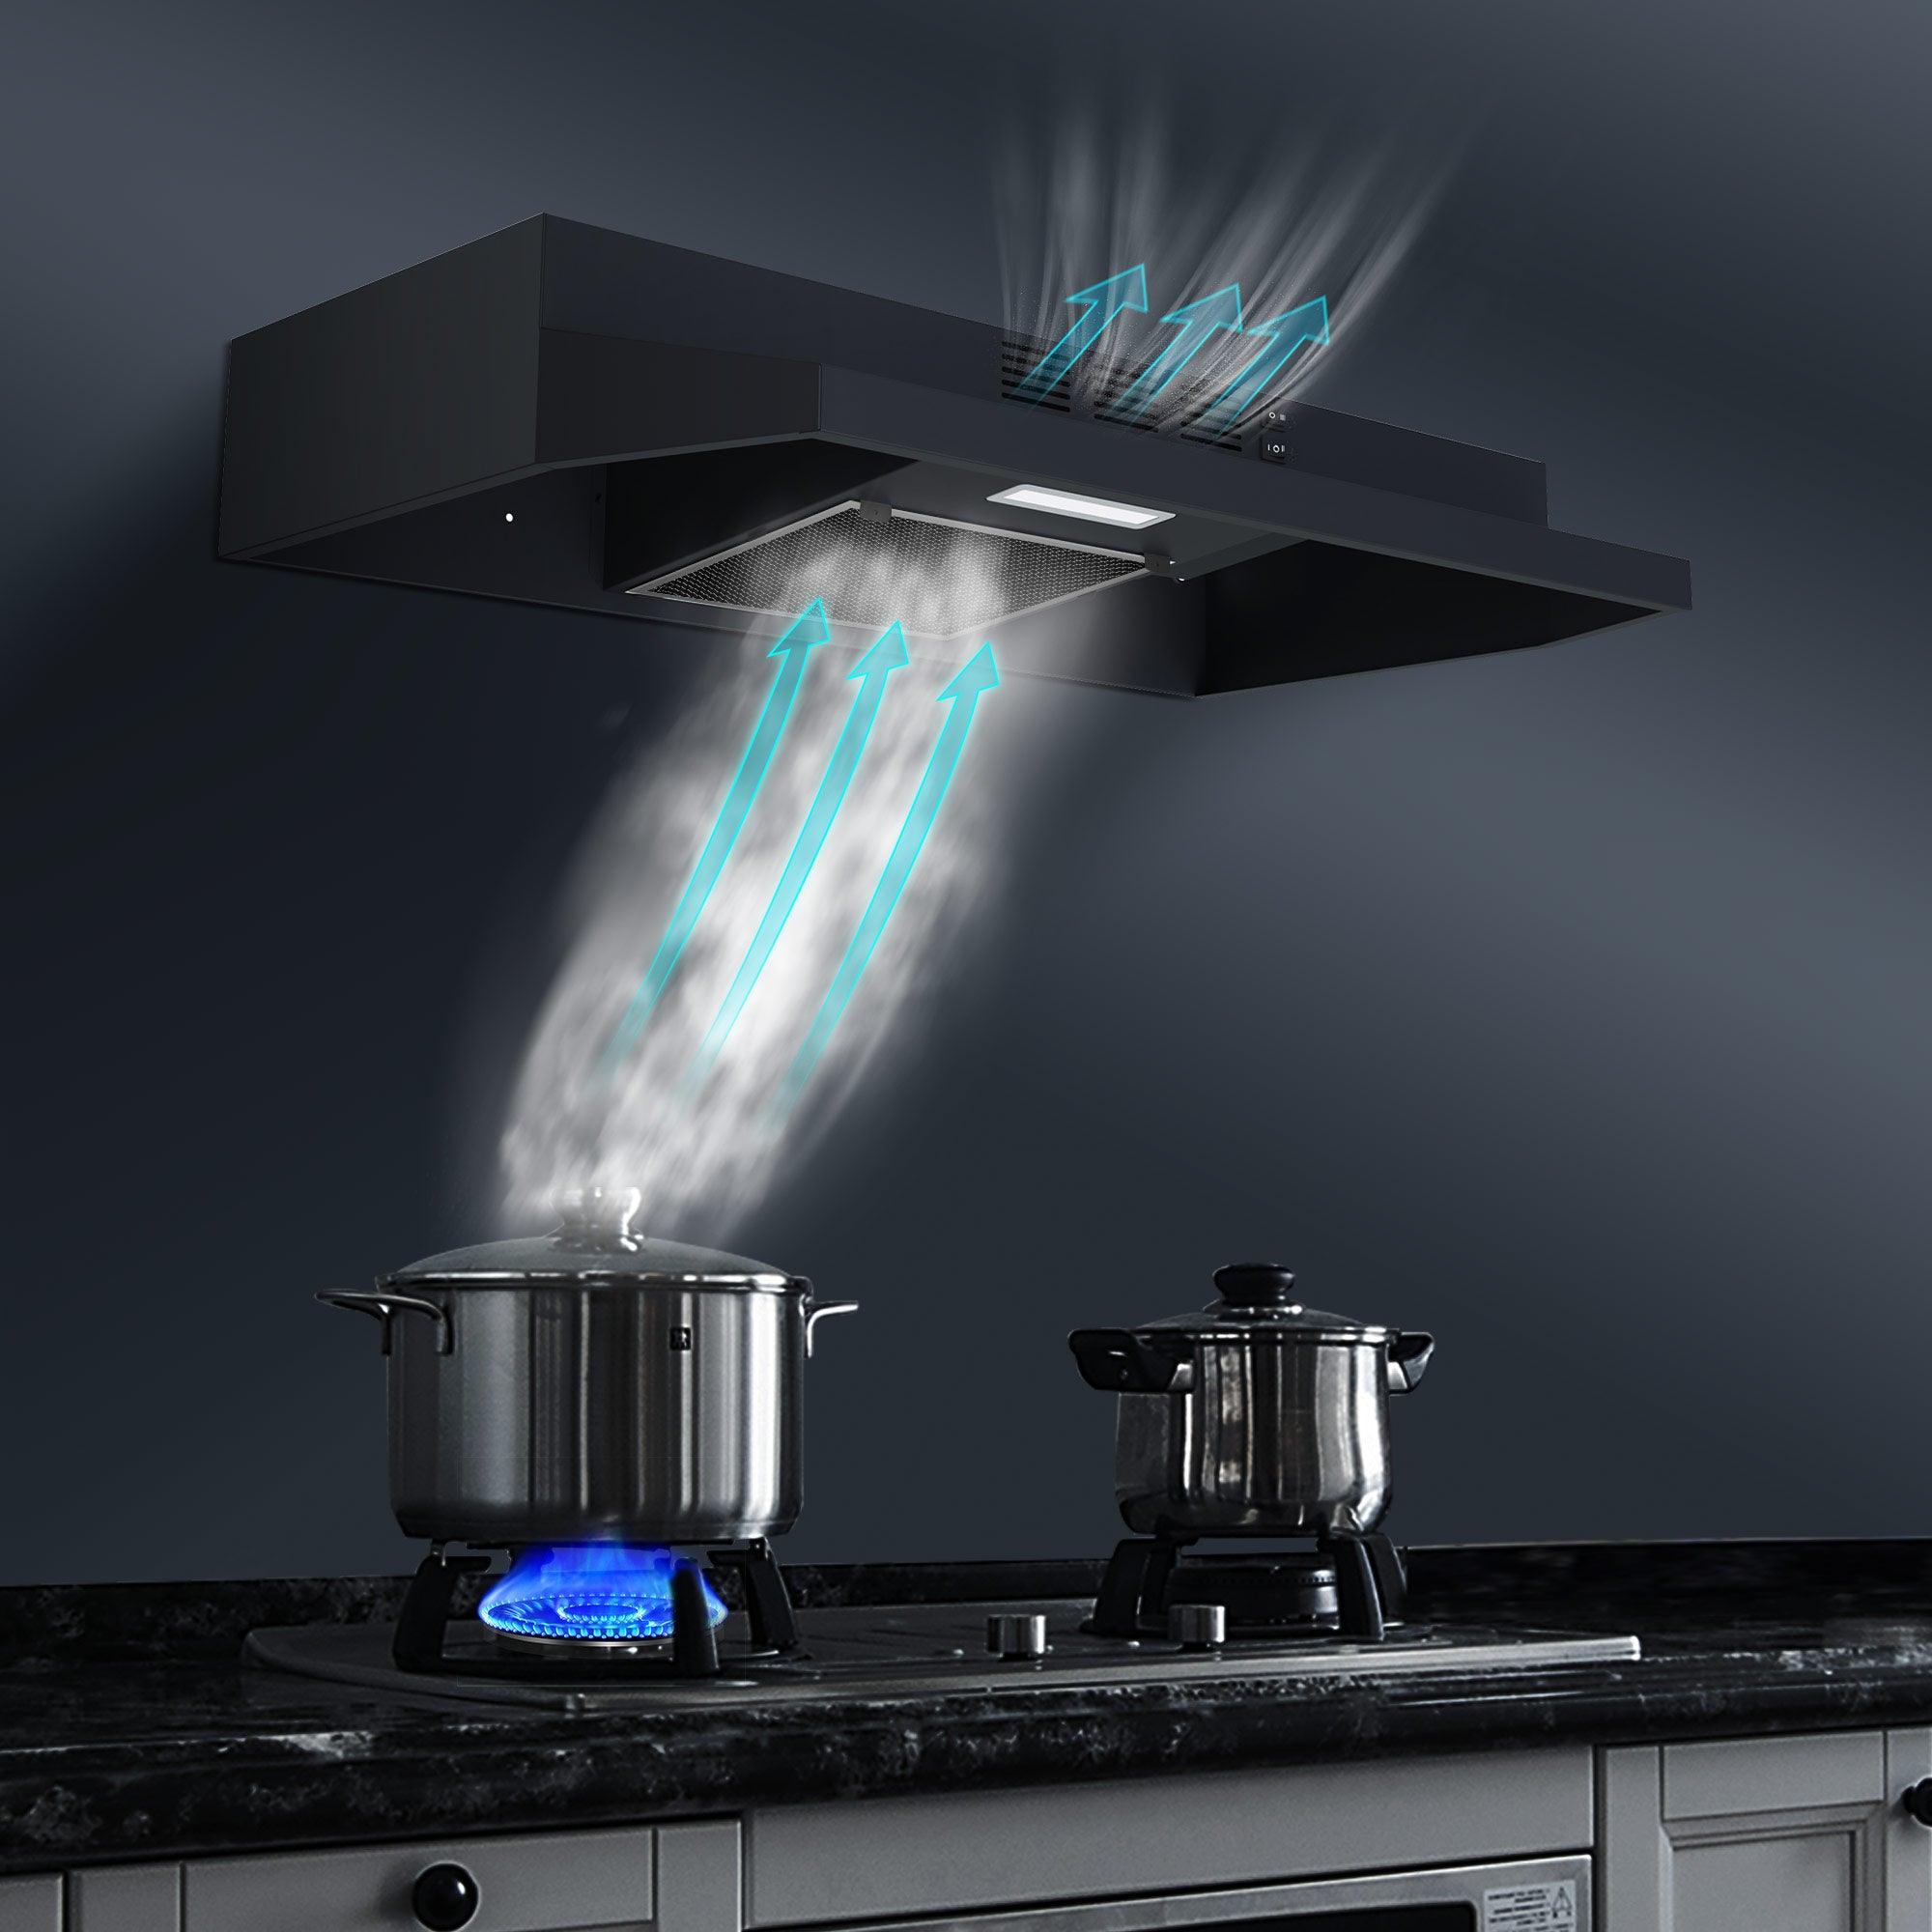 Tieasy 30 inch Under Cabinet Range Hood, Ducted/Ductless Convertible Kitchen Hood - ‎GF3976WH/BK